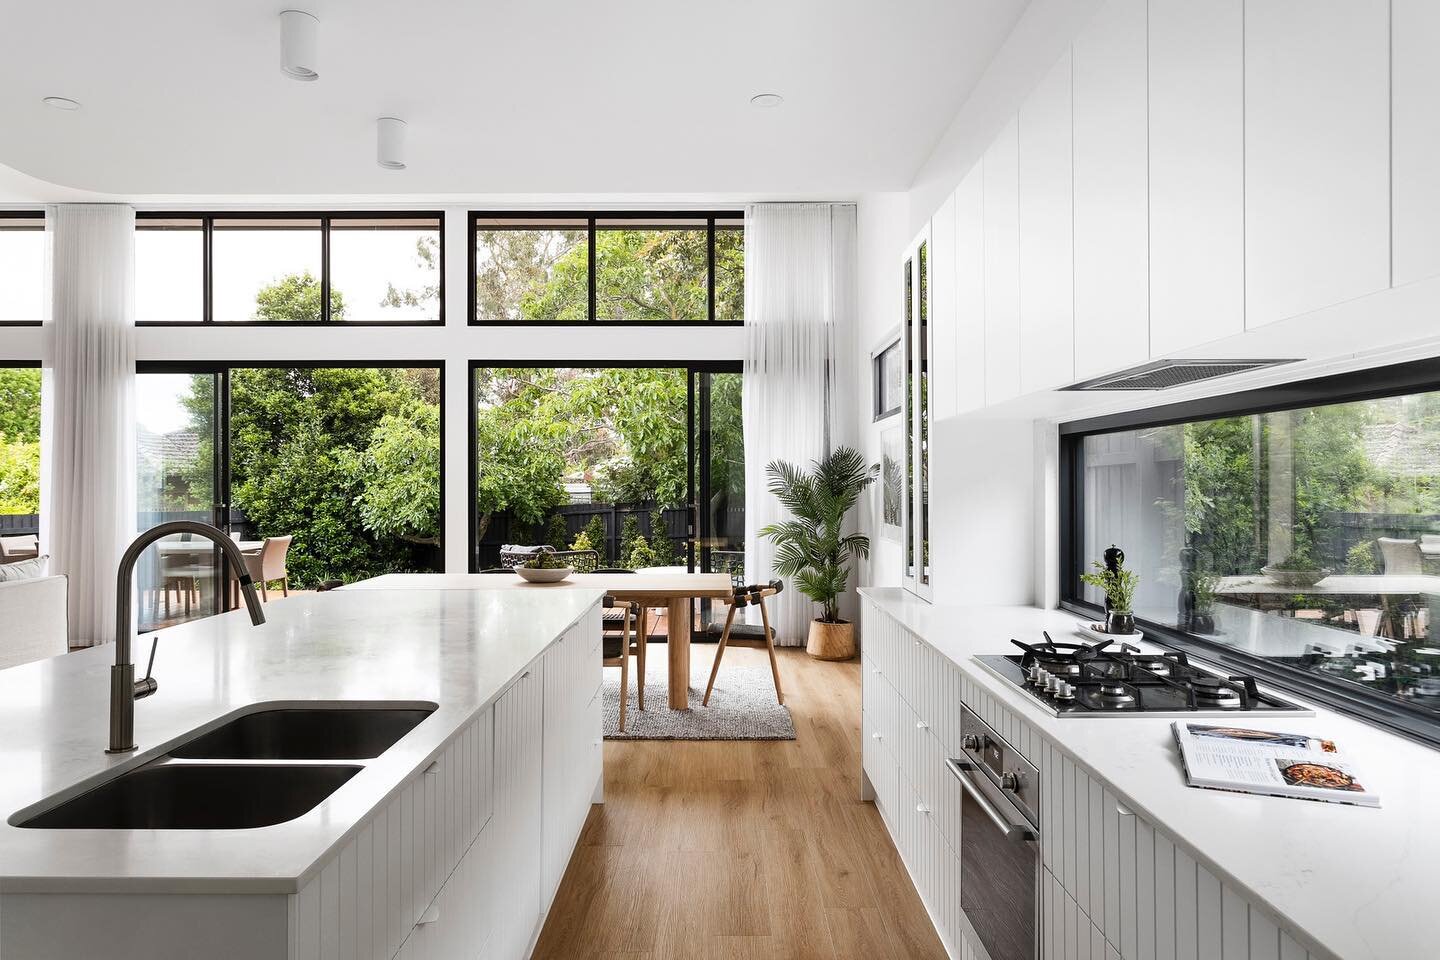 Loving all the kitchen angles from our Thornbury project!

The well thought indoor/outdoor connection is softened by flowing window treatment. What&rsquo;s there not to like about this relaxed and inviting space?

Project: Speight St, Thornbury

